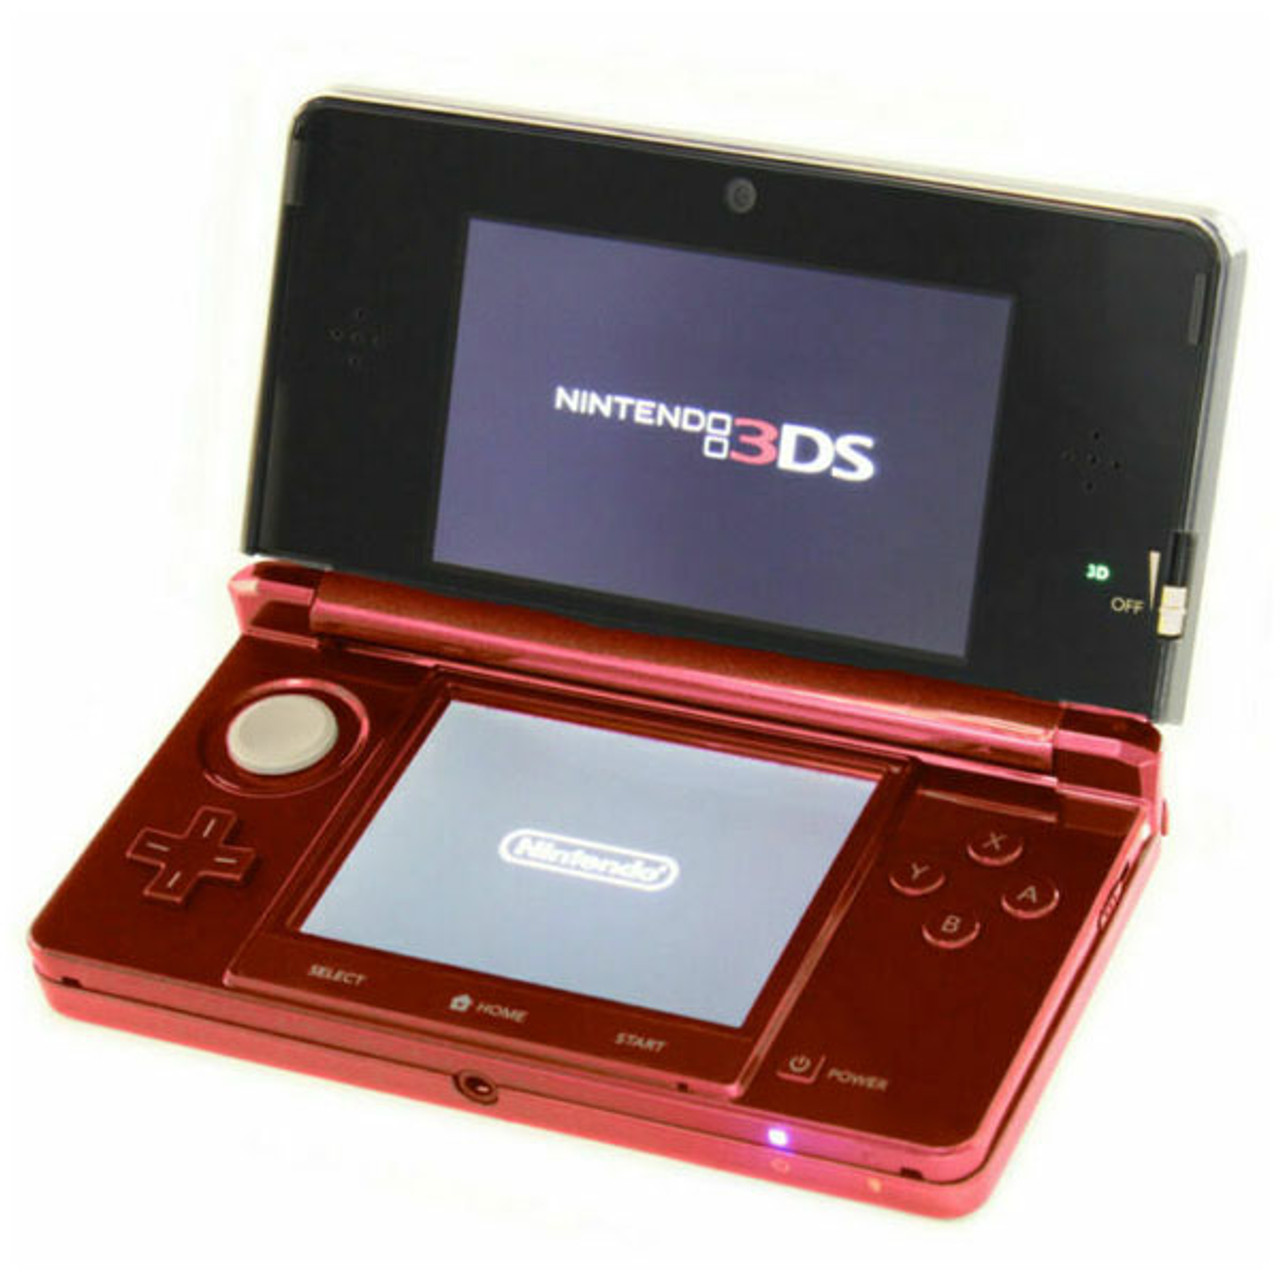 Where to buy used 3ds